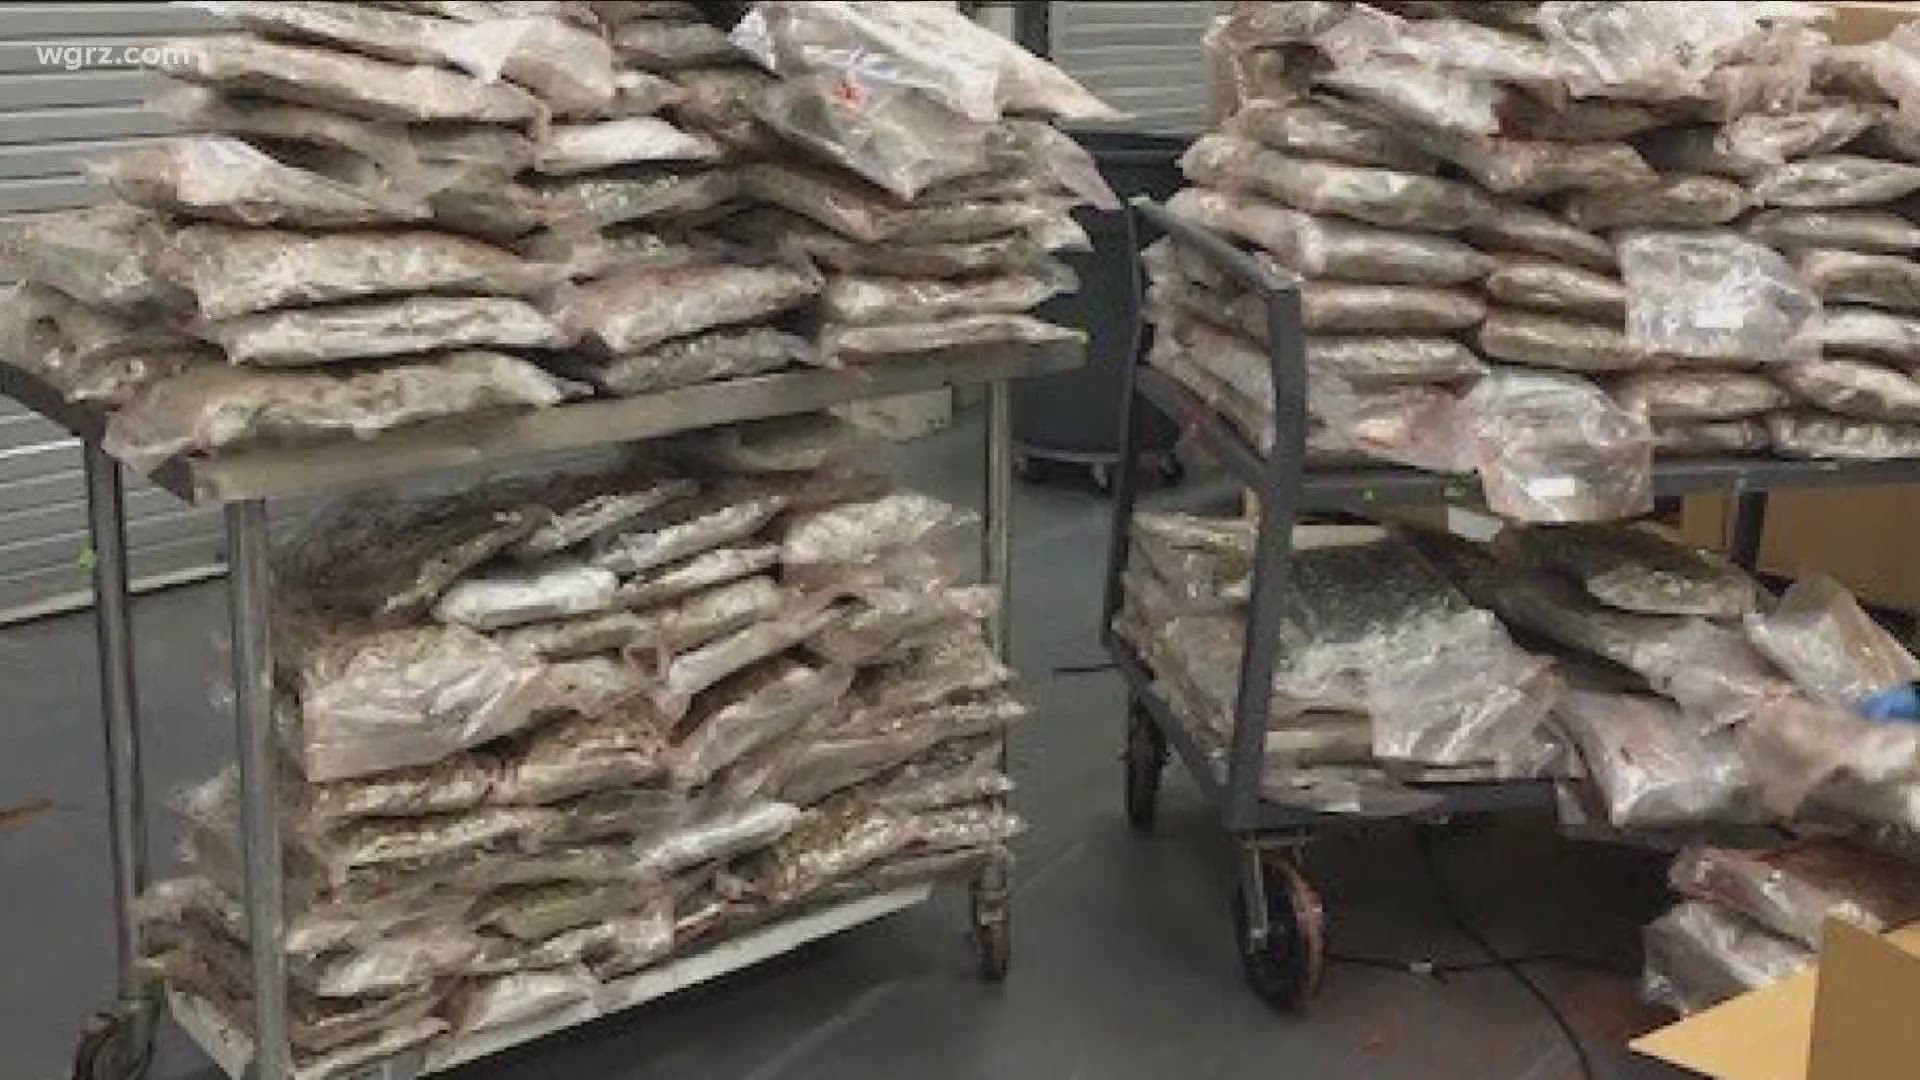 Federal officers at the Peace Bridge intercepted a truckload of marijuana. This has been a n increasing surge of smuggling pot over the border.